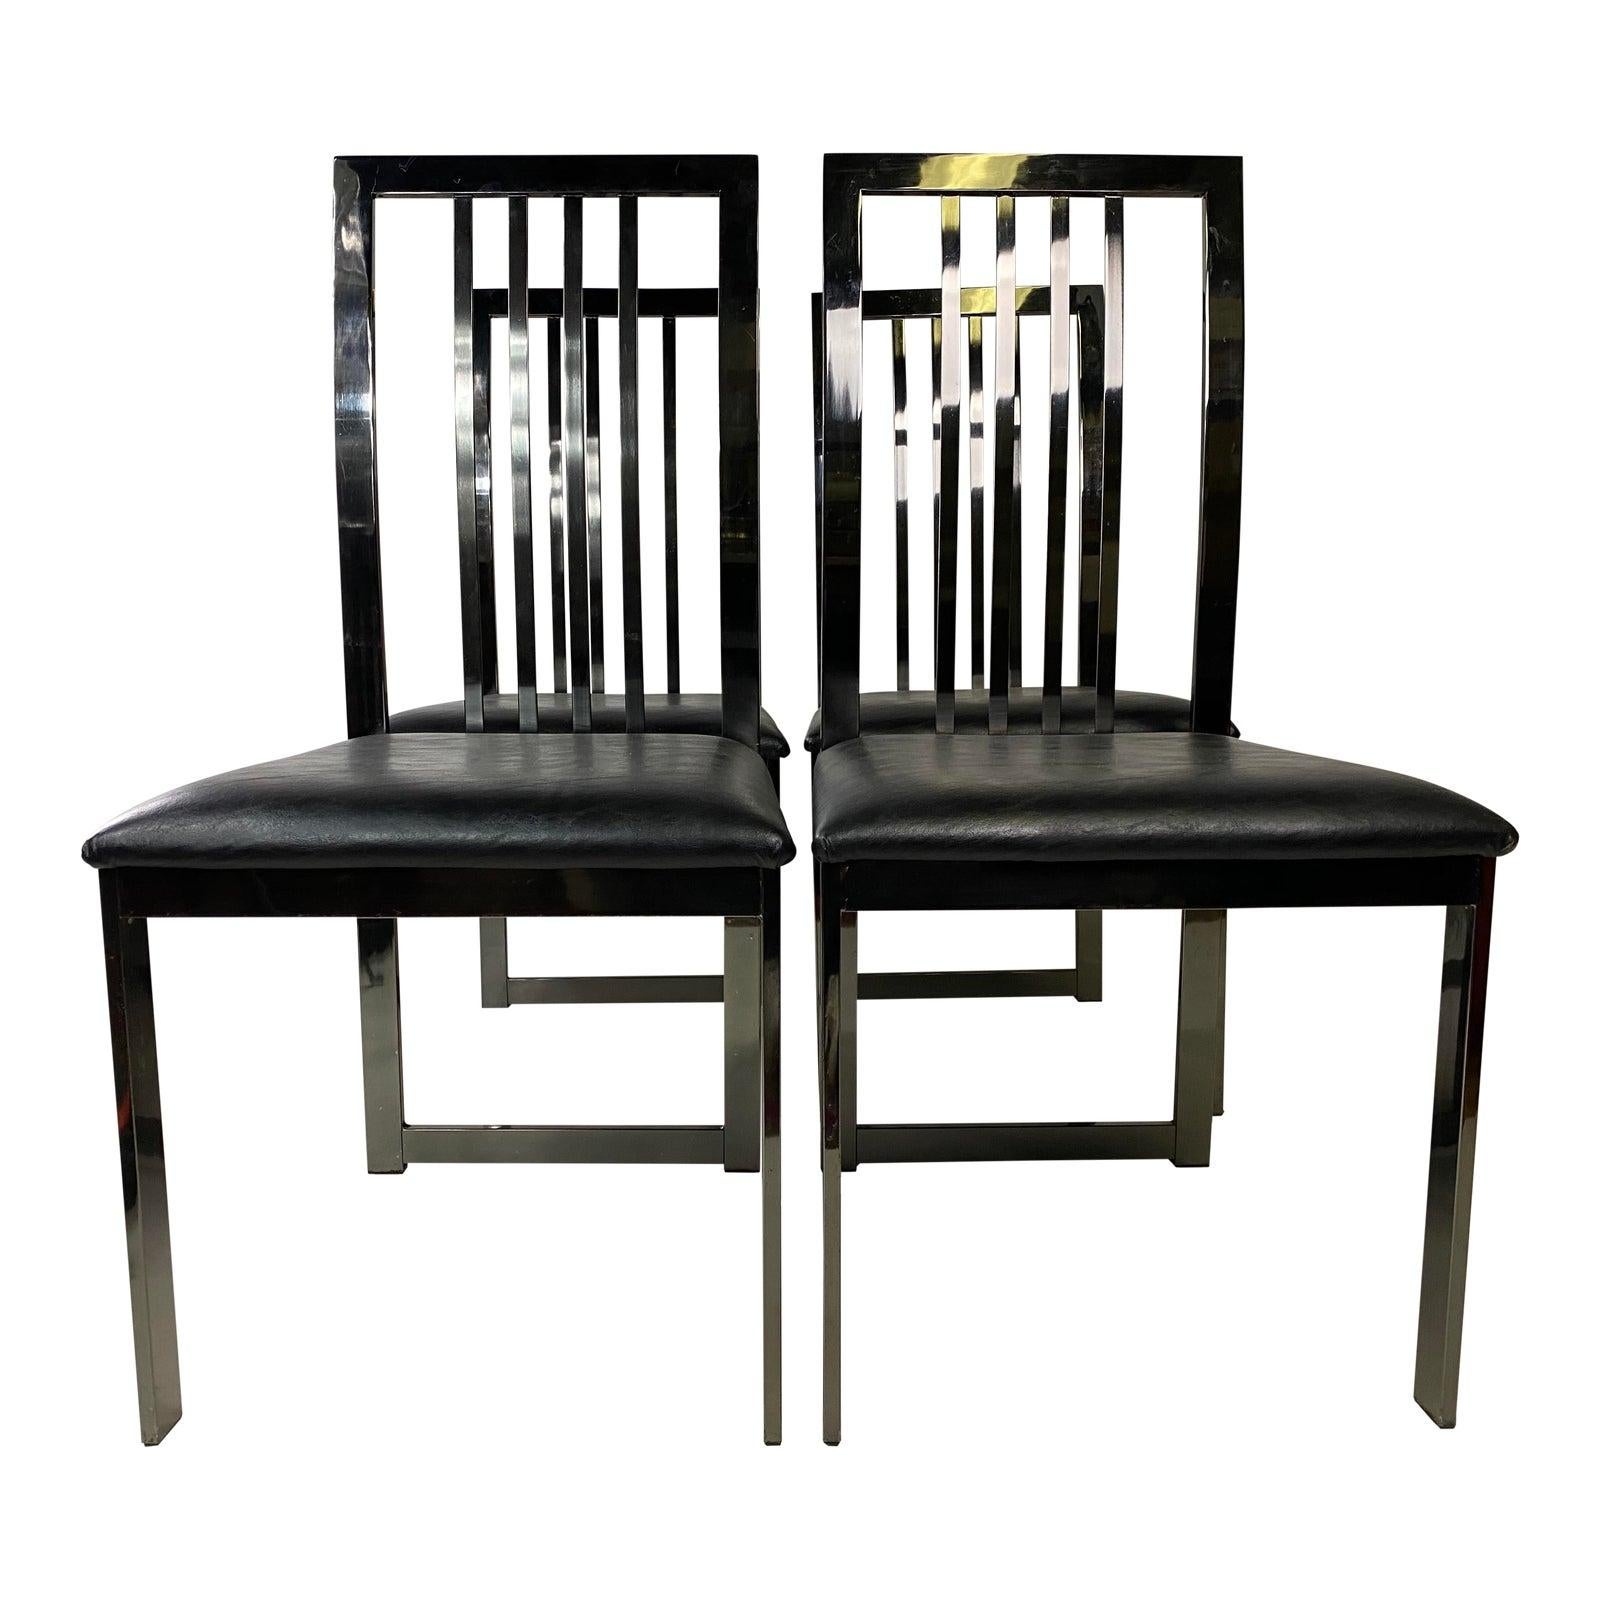 Dia Stylish Vintage Chrome High Back Dining Chairs Baughman Style, Set of 4